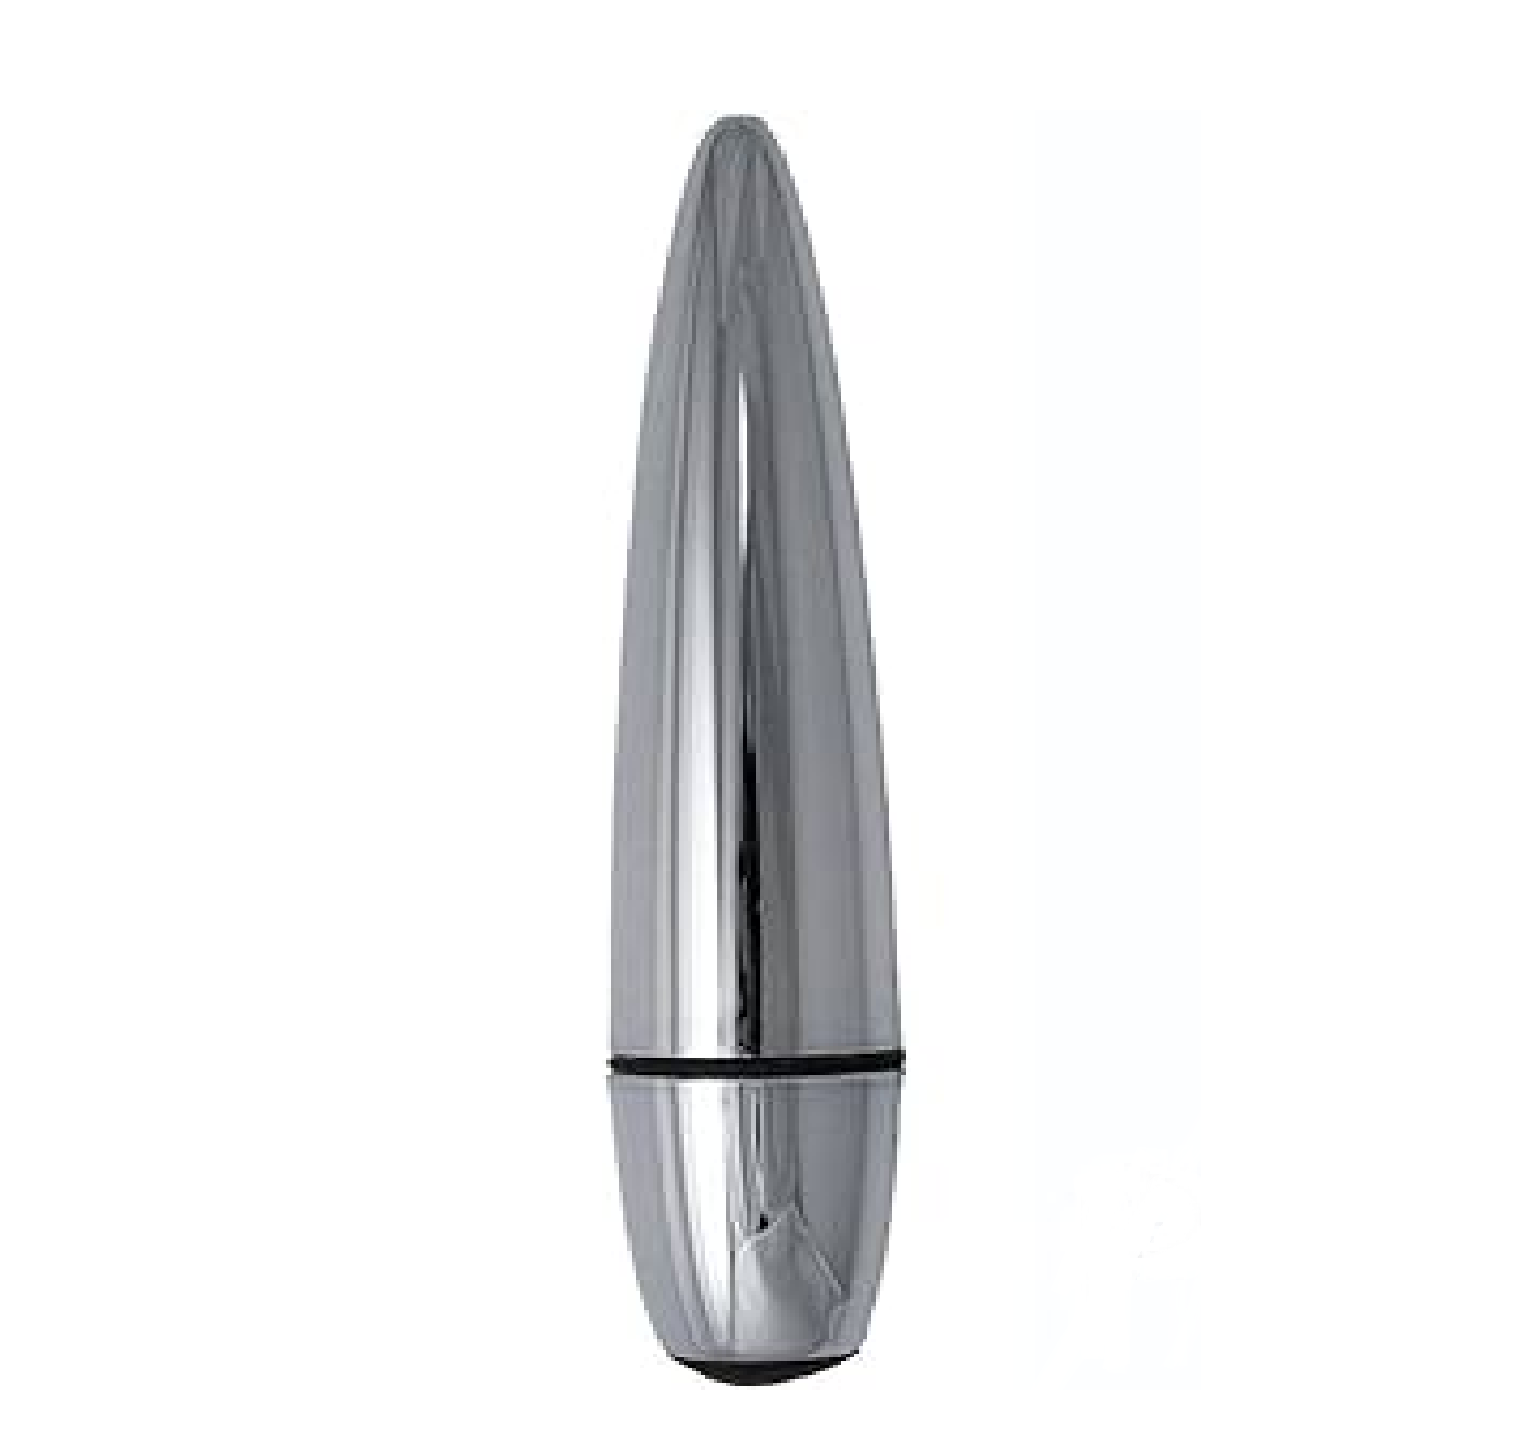 Desired Pleasure with Exciter Bullet Vibrator - Silver